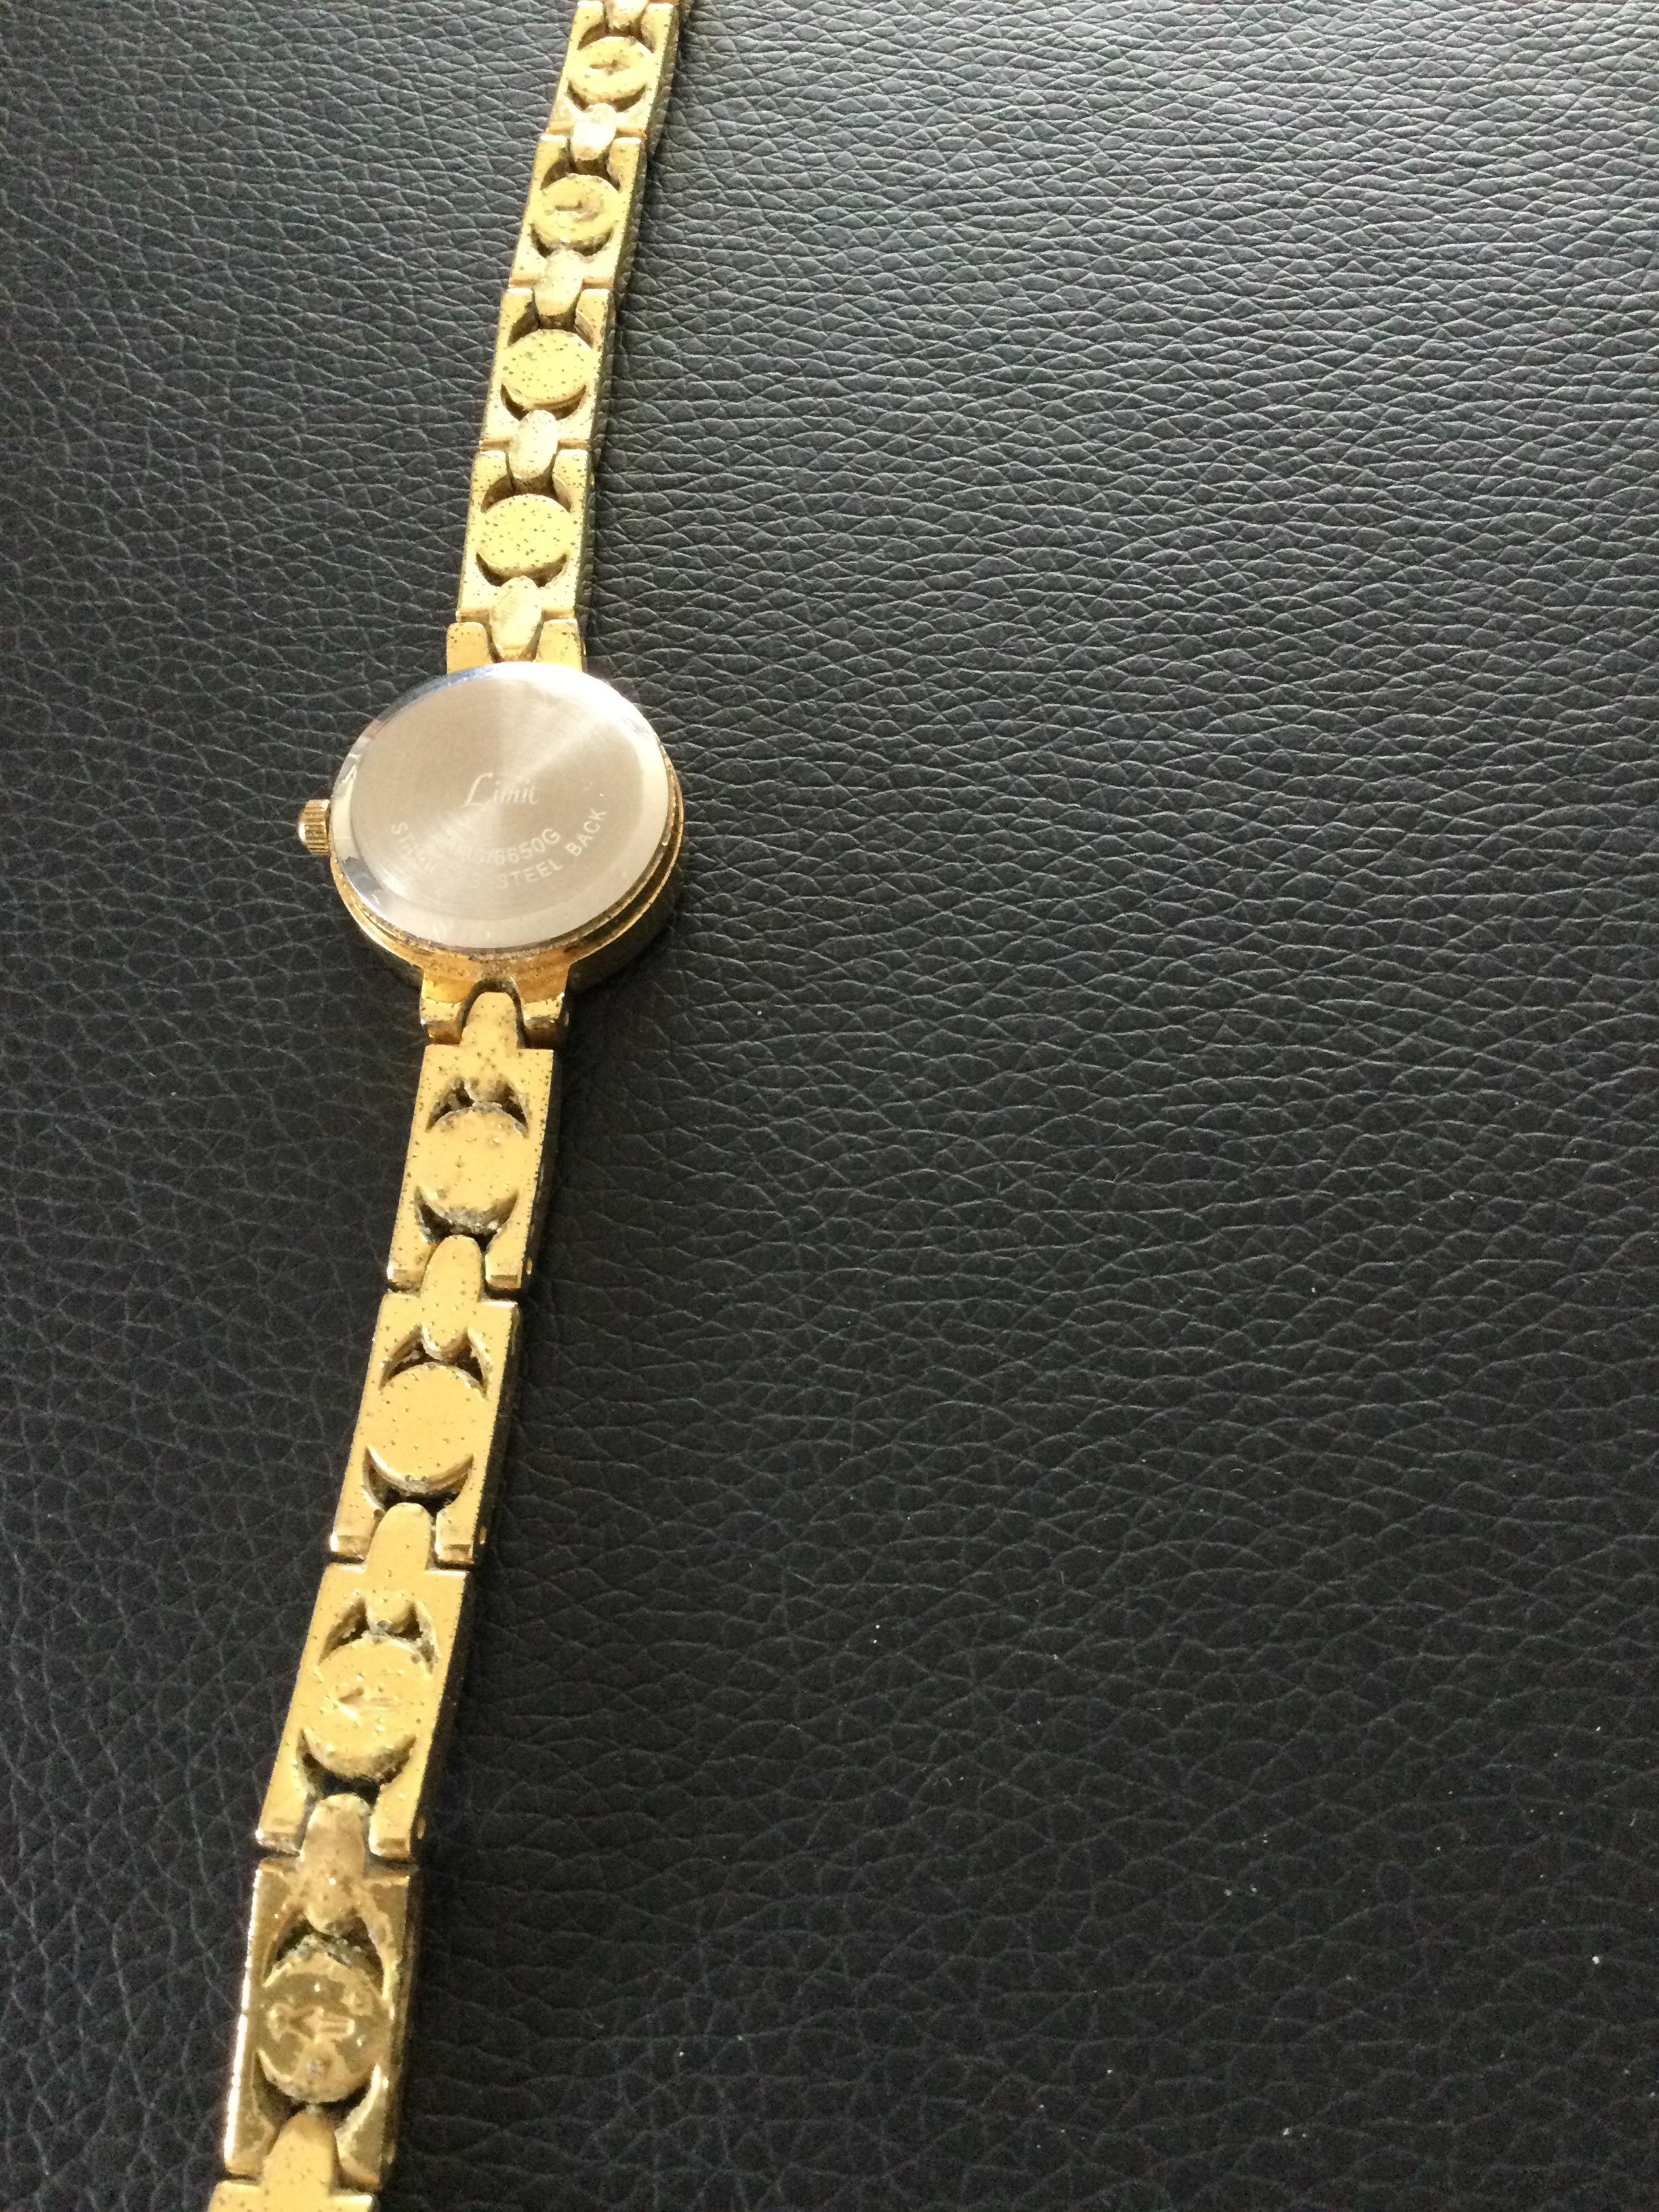 Gold Plated Limit Ladies Diamante Wristwatch (GS 121) - Image 3 of 5